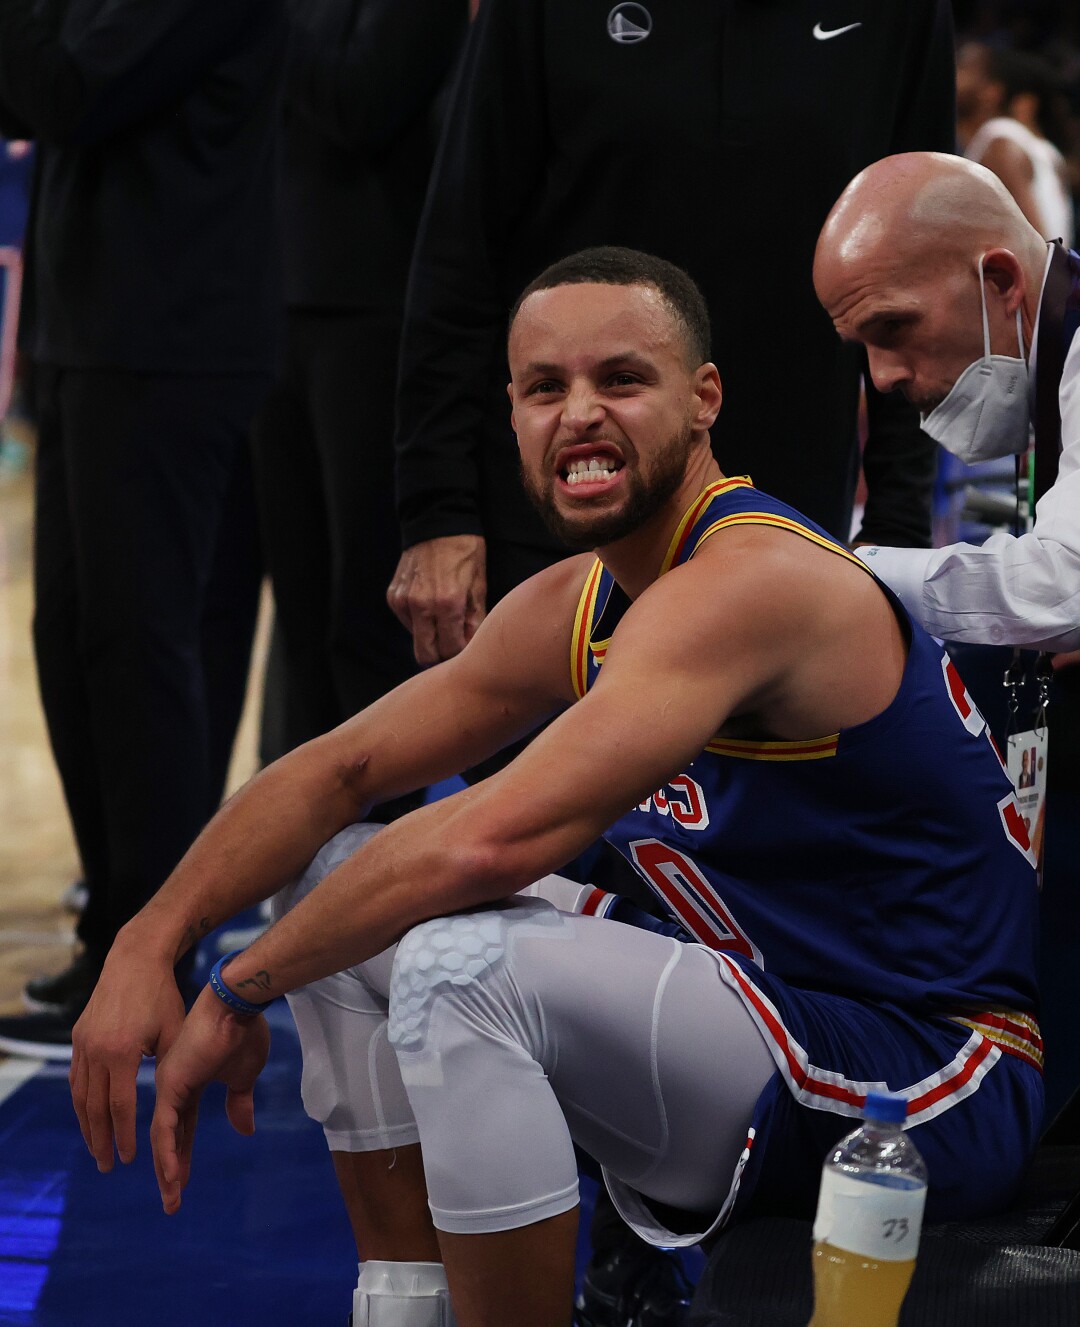 Stephen Curry makes faces from the bench after making a three-point basket to break Ray Allen’s record.